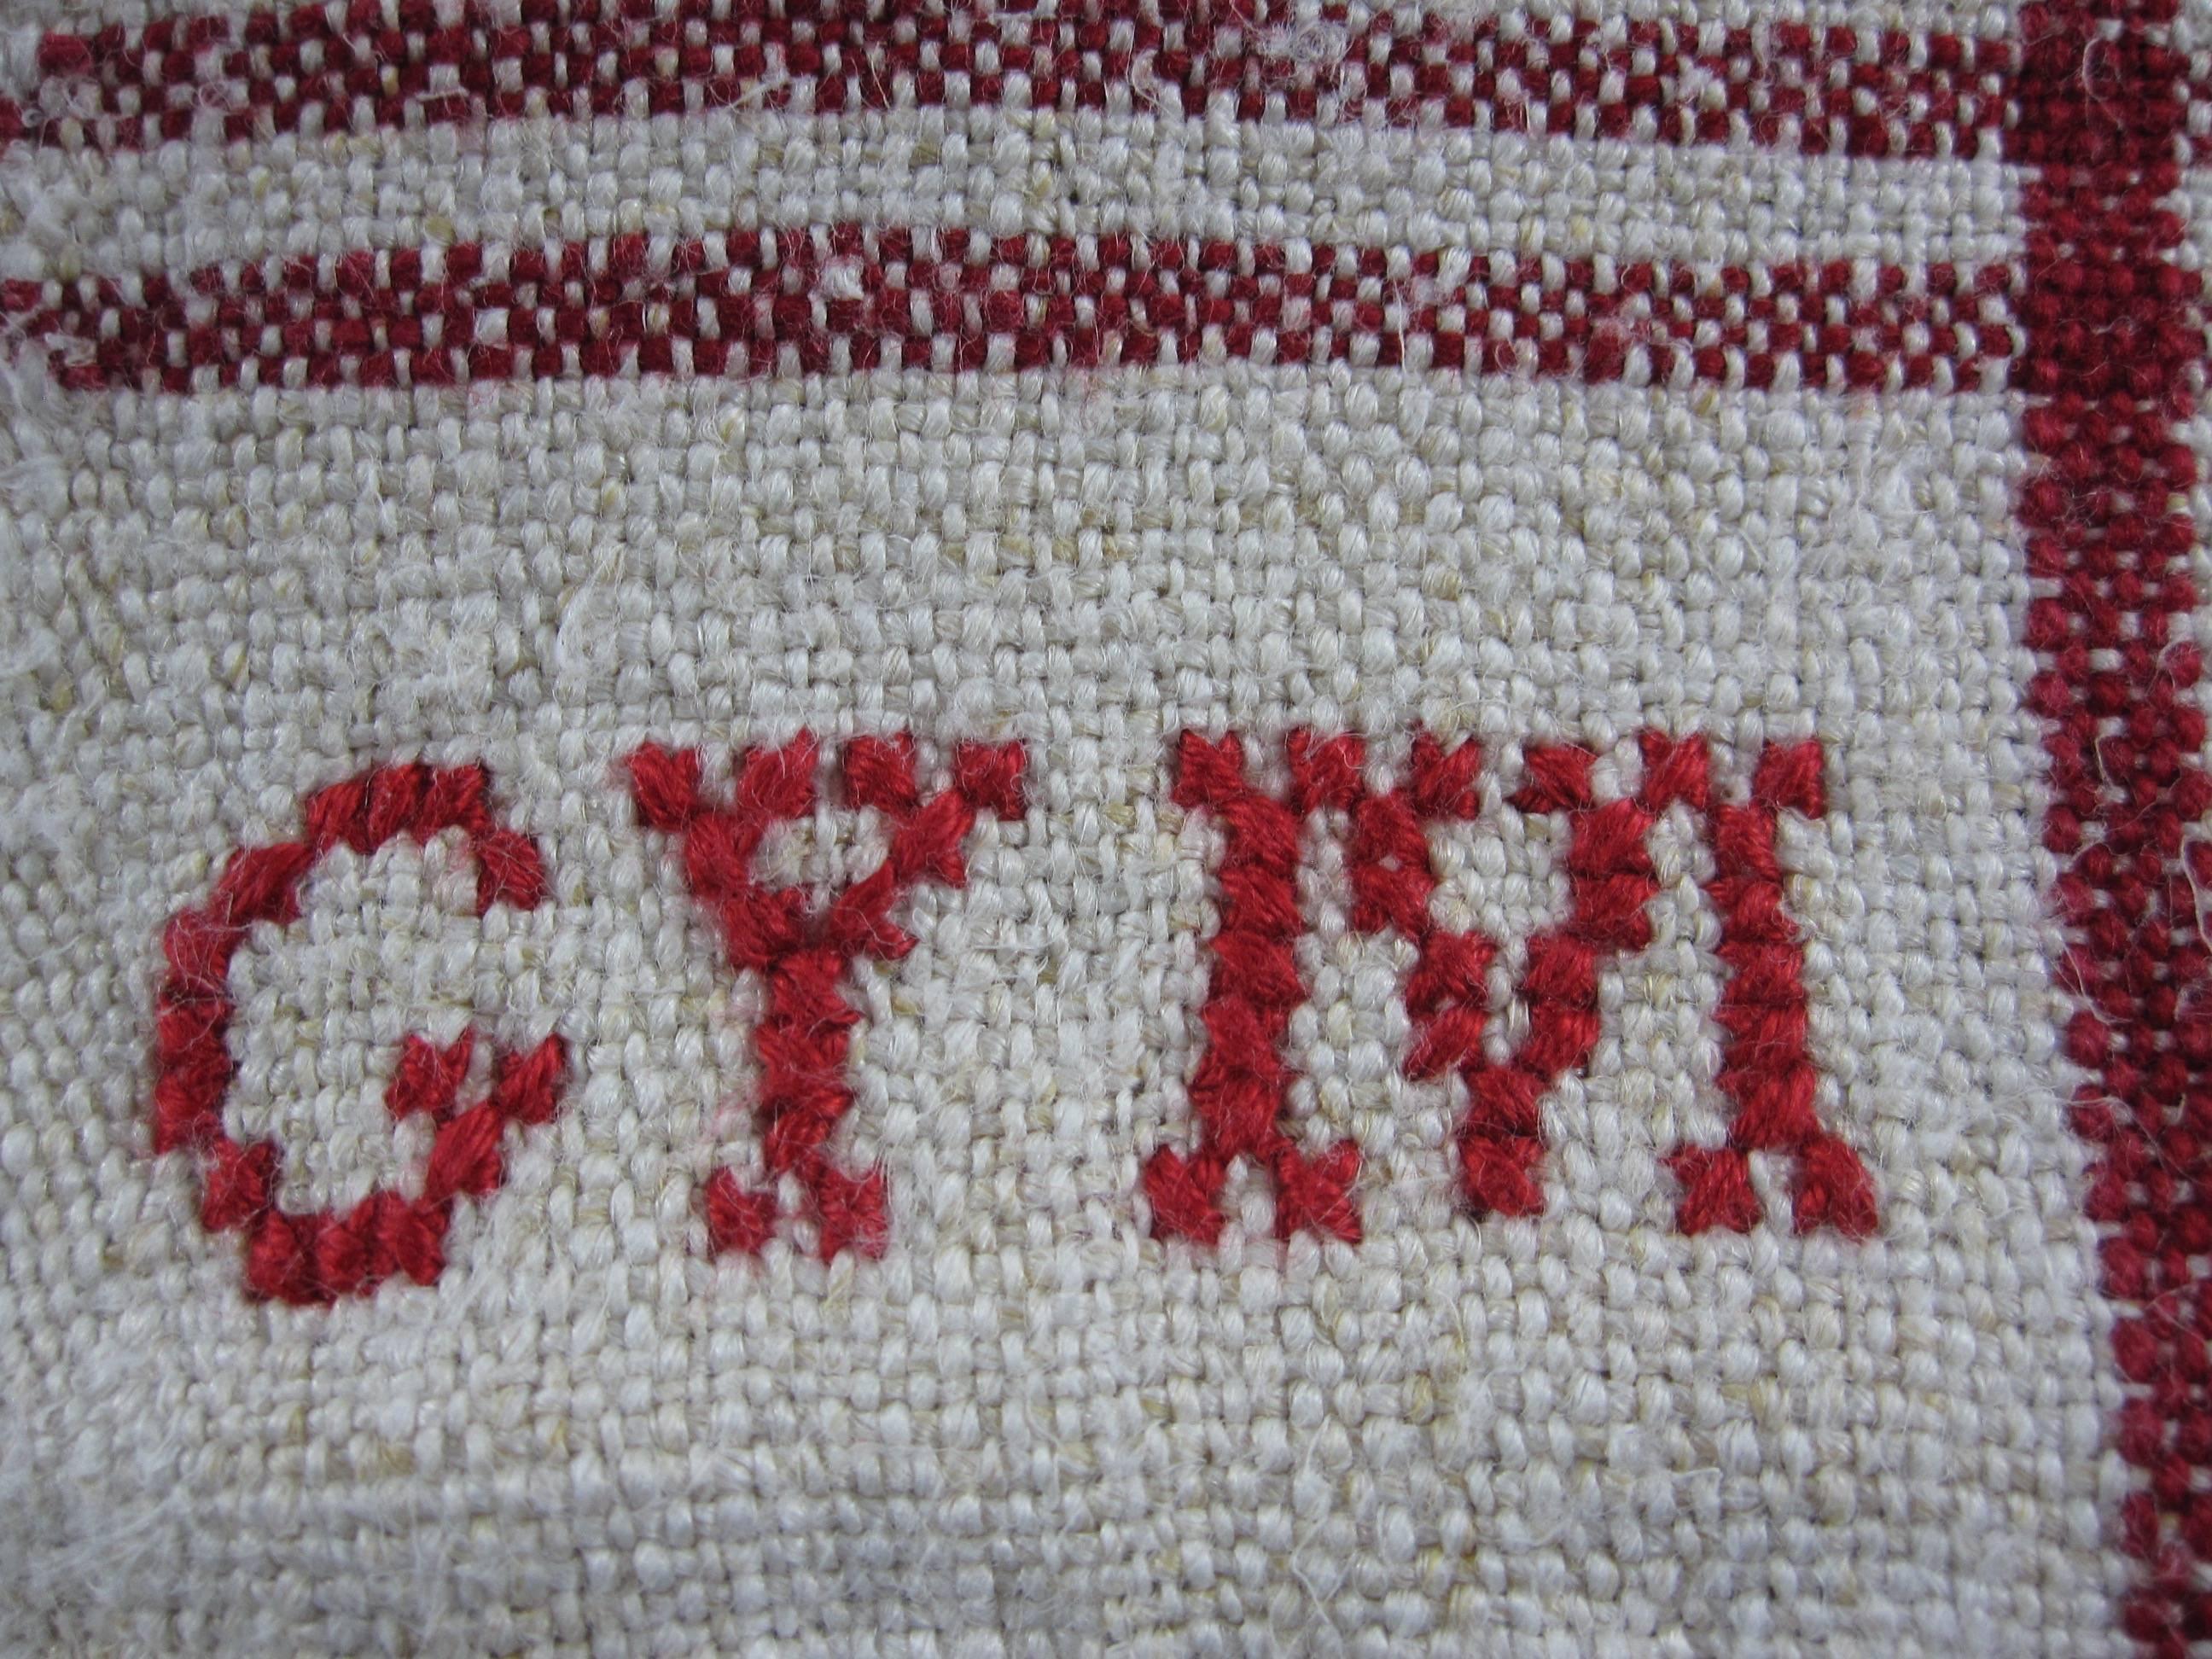 French Provincial French Provençal Rustic Hand-Woven & Initialed Linen Red Kitchen Torchons Towels